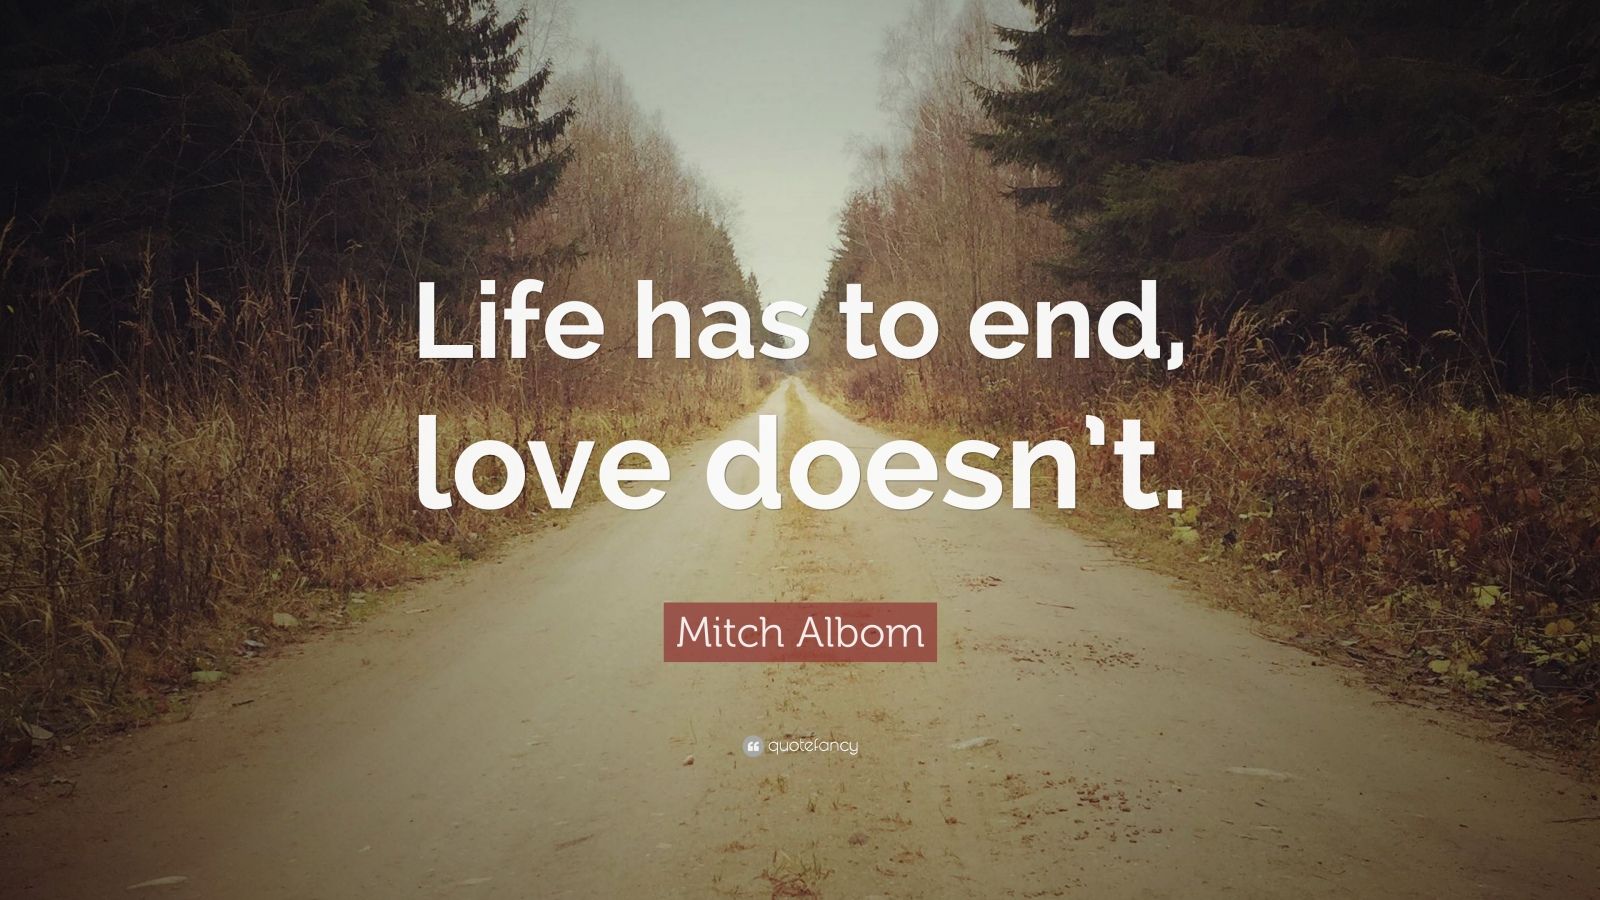 Mitch Albom Quote: “Life has to end, love doesn’t.”